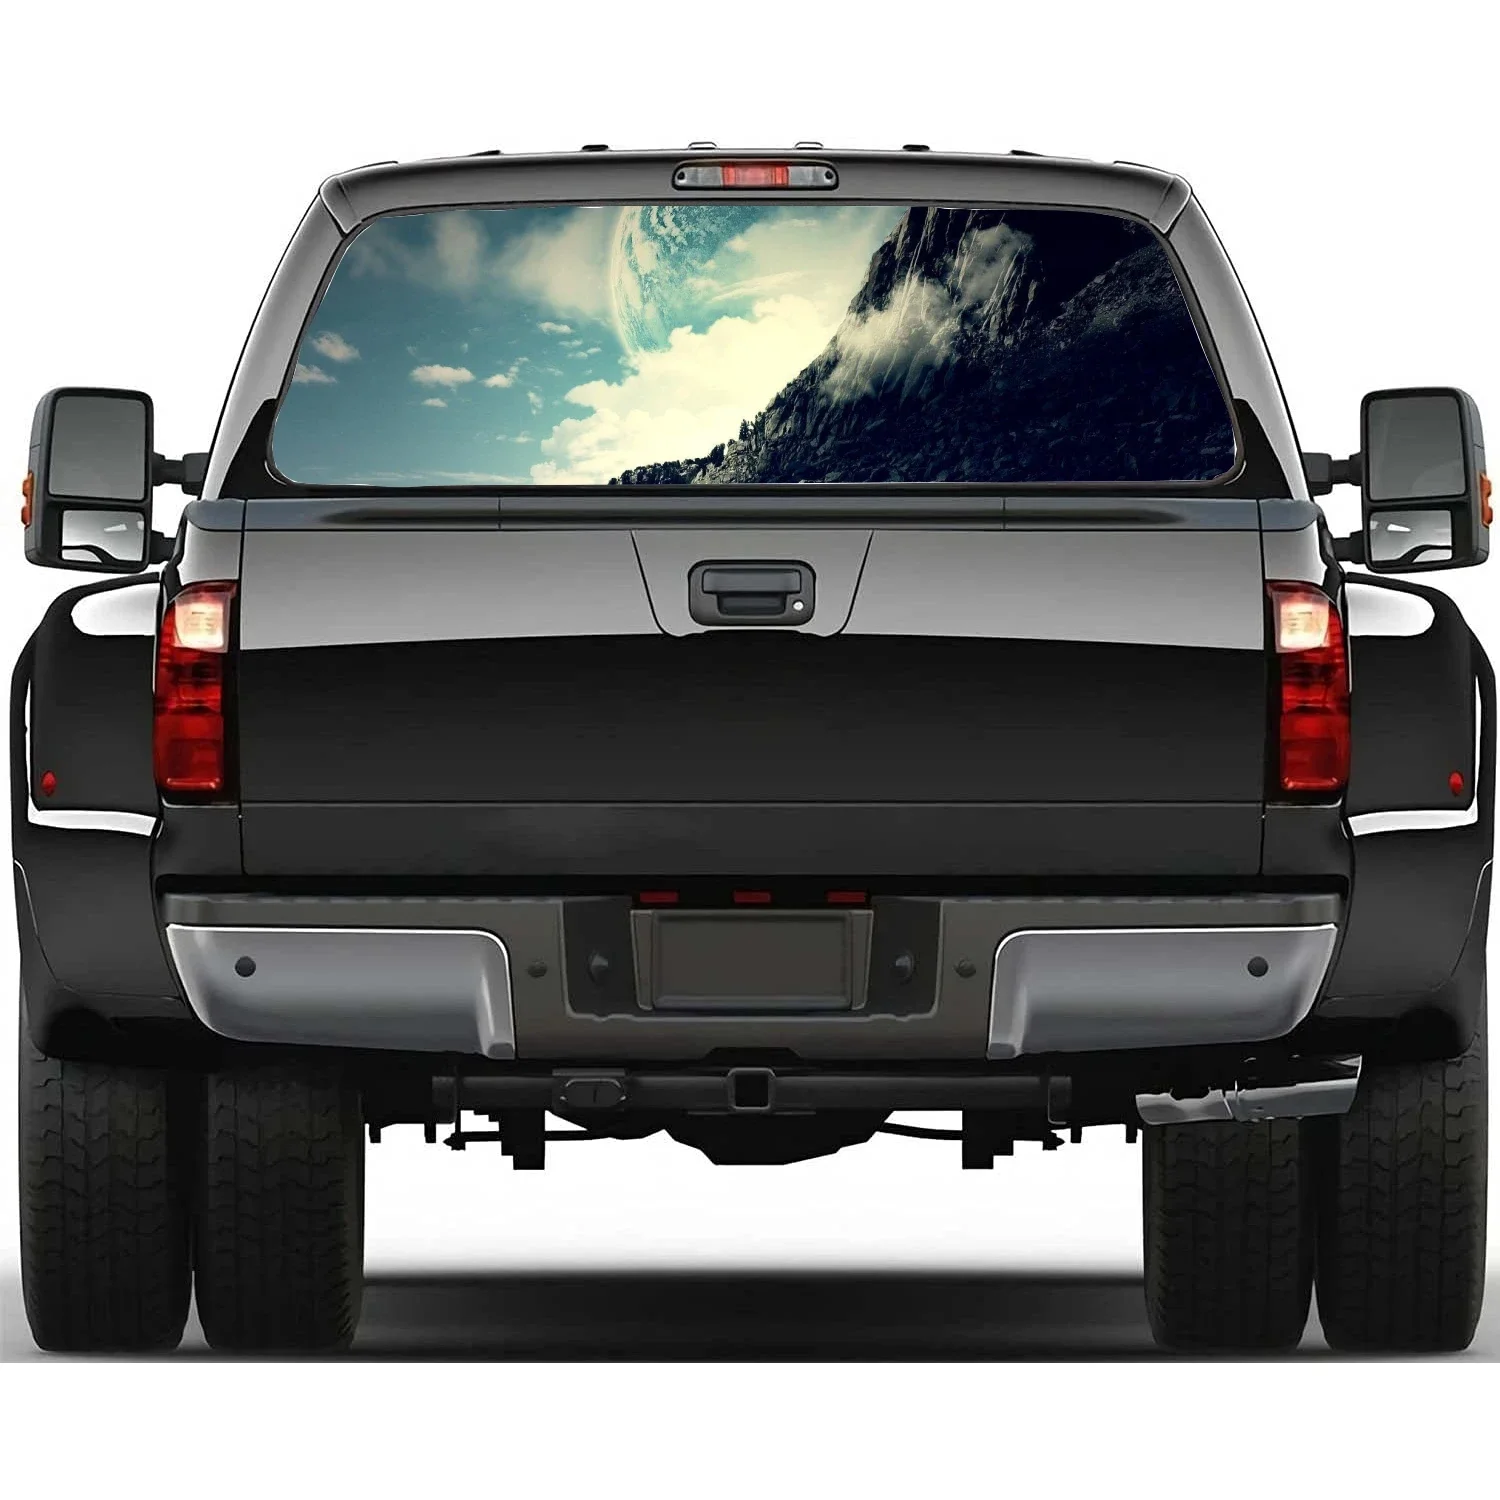 

Sky Cloud Mountain Car Accessories Rear Windshield Sticker Truck Window See Through Perforated Back Window Vinyl Decal Decor